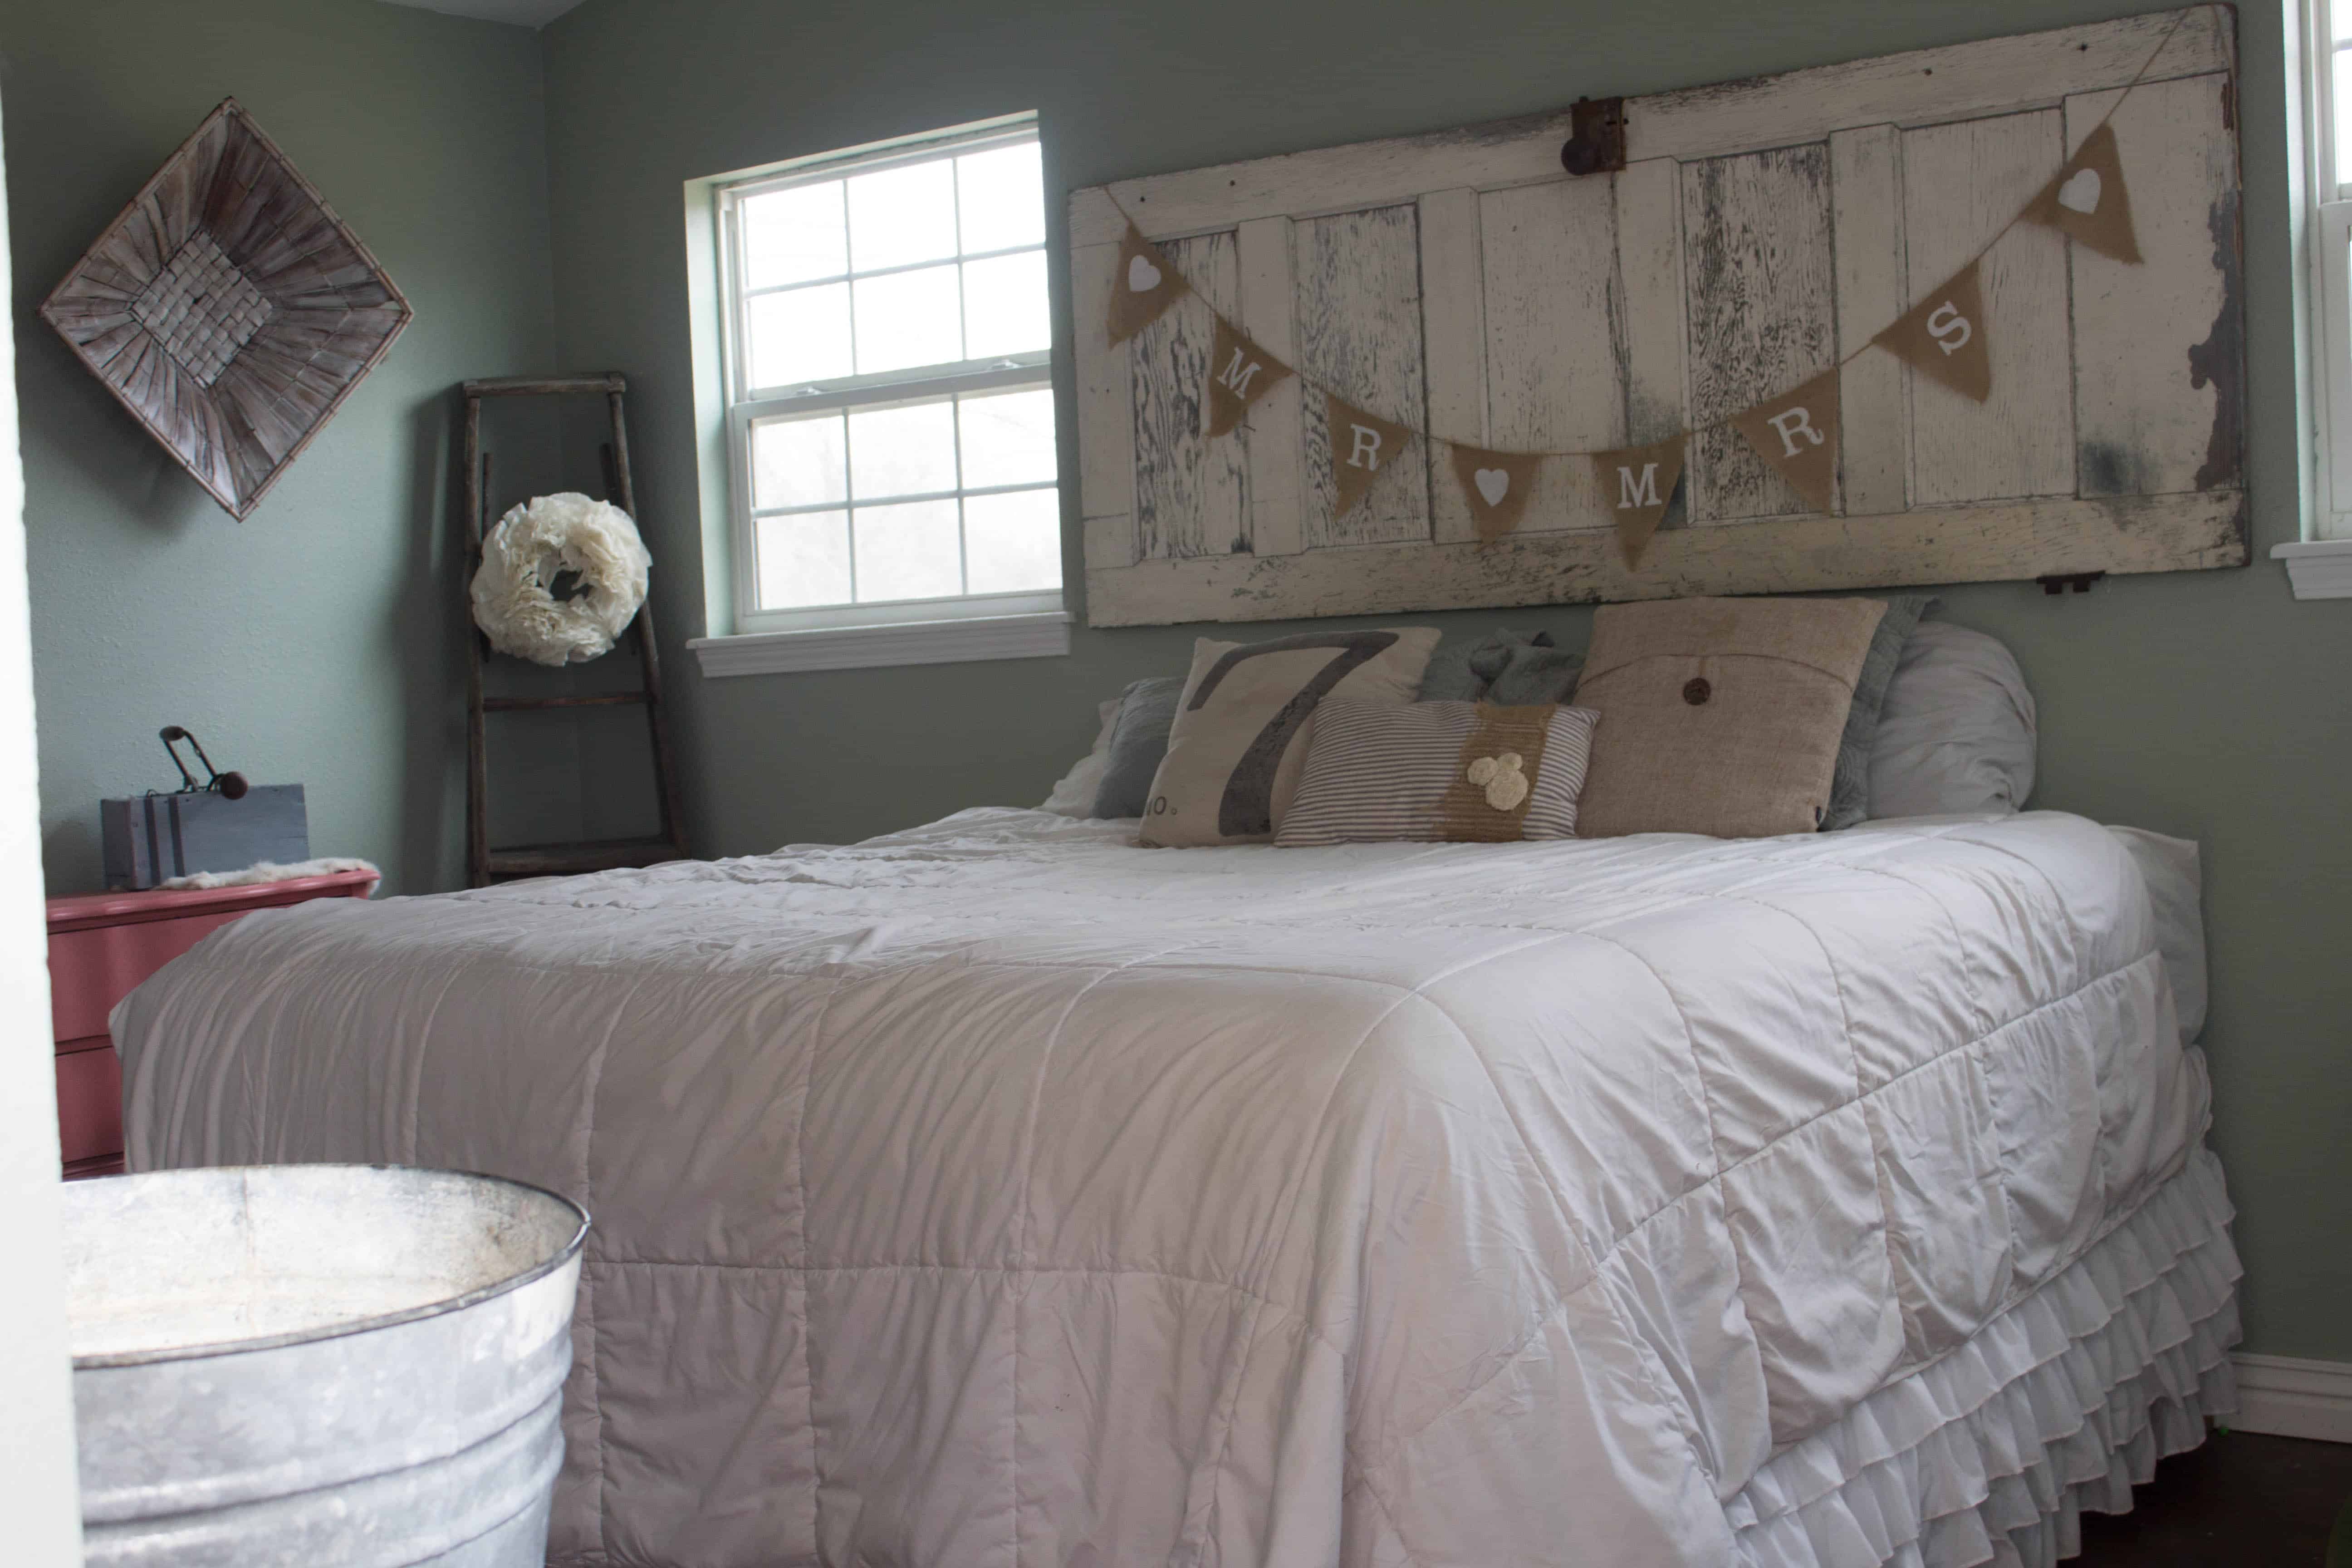 Add charm to your farmhouse bedroom with these simple tips!